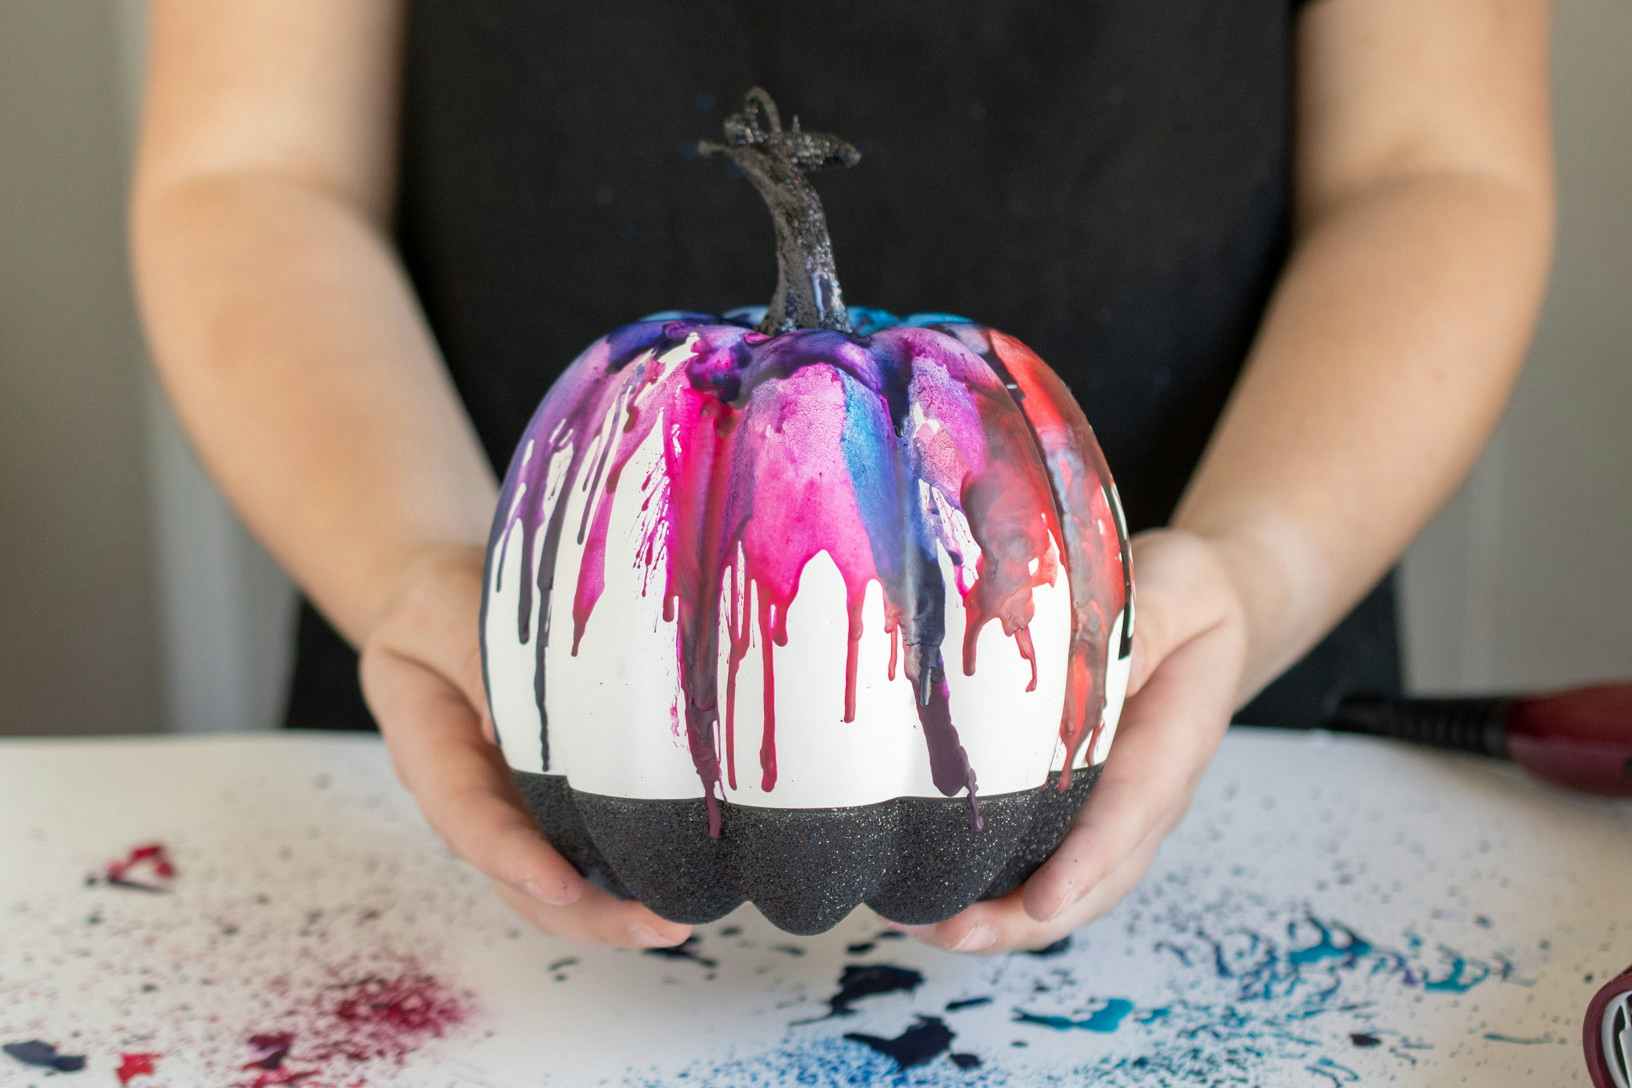 A person holding an artificial pumpkin with melted crayons dripping from the top to the bottom.